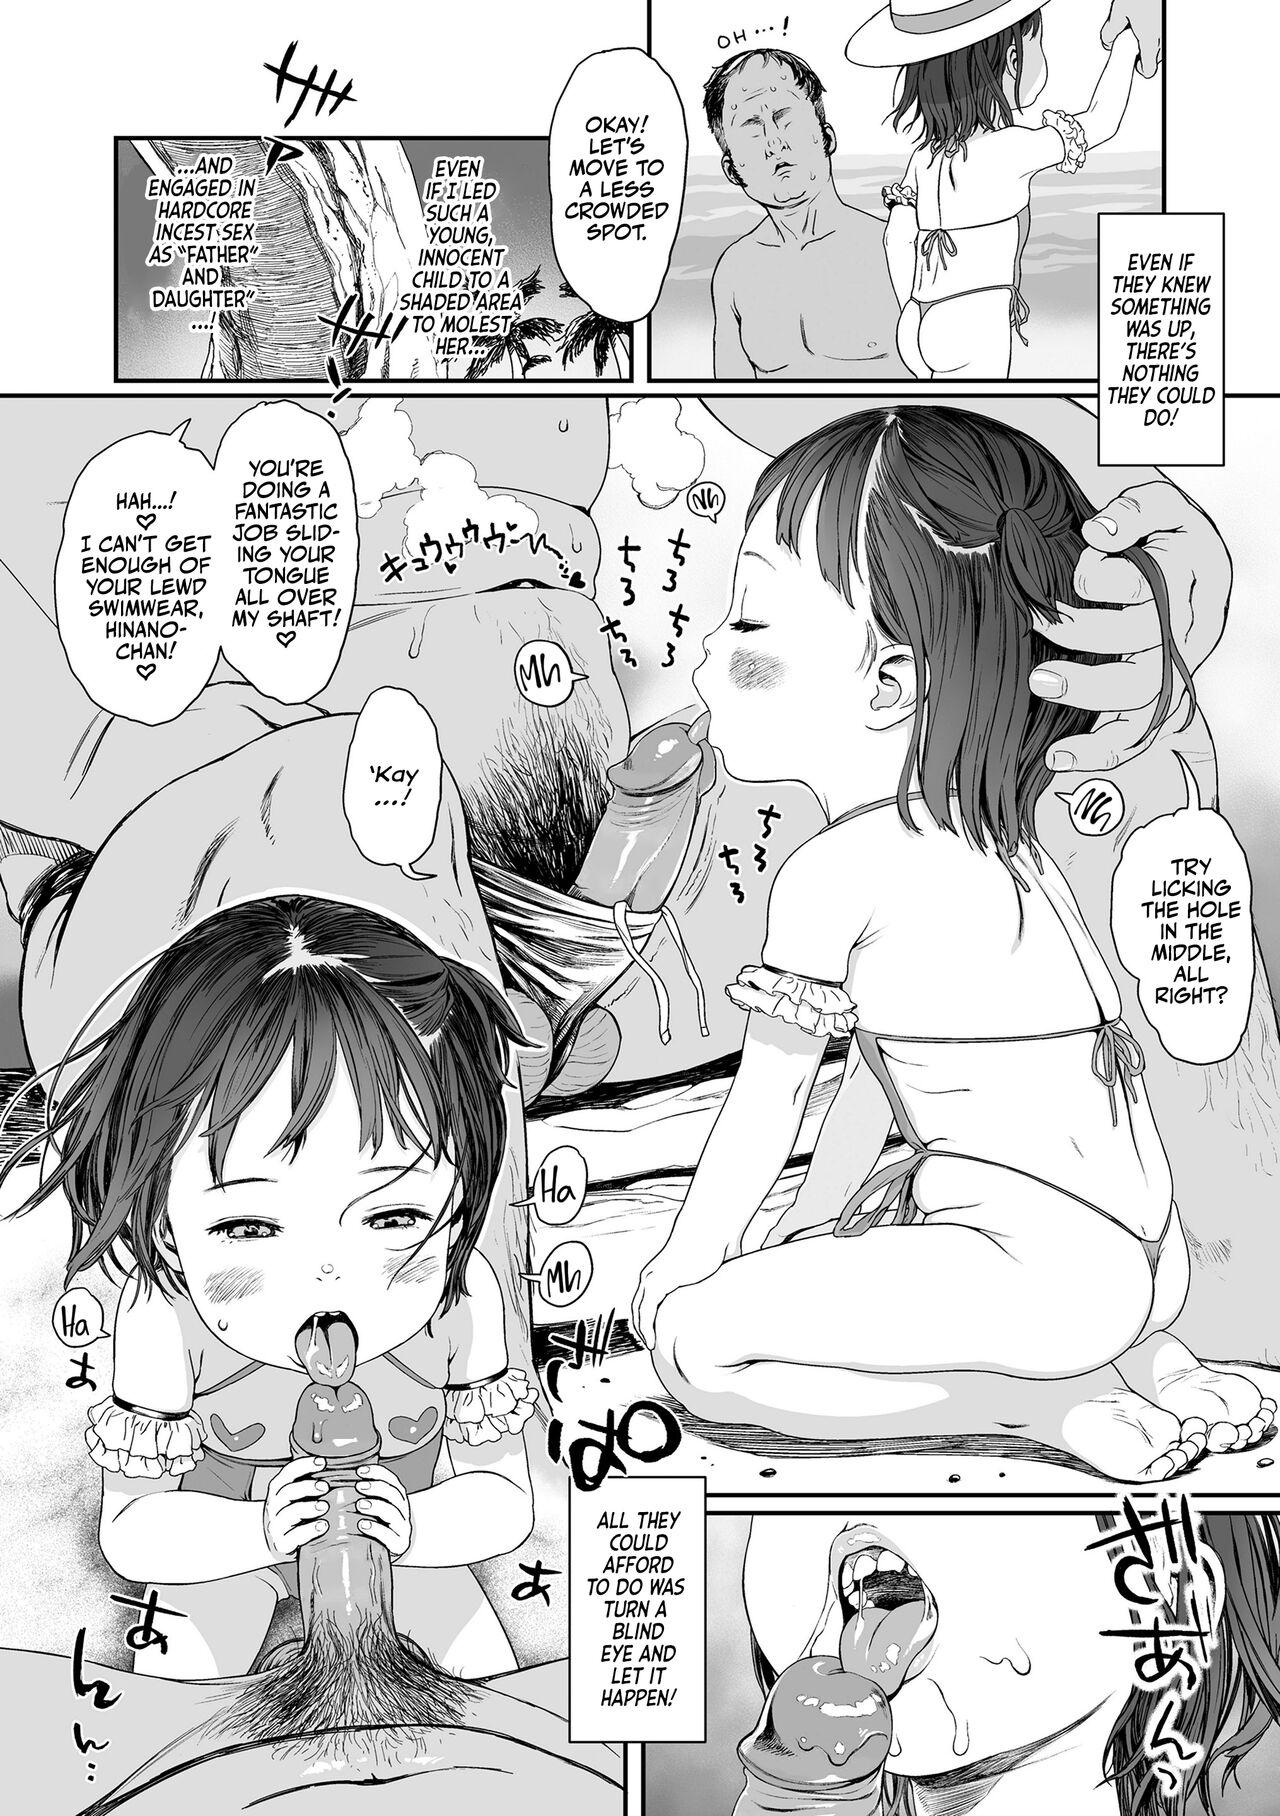 1080p Minami no Kuni de Hina wo Tobasete | Hina in the Sky of a Country from the South! Swingers - Page 2